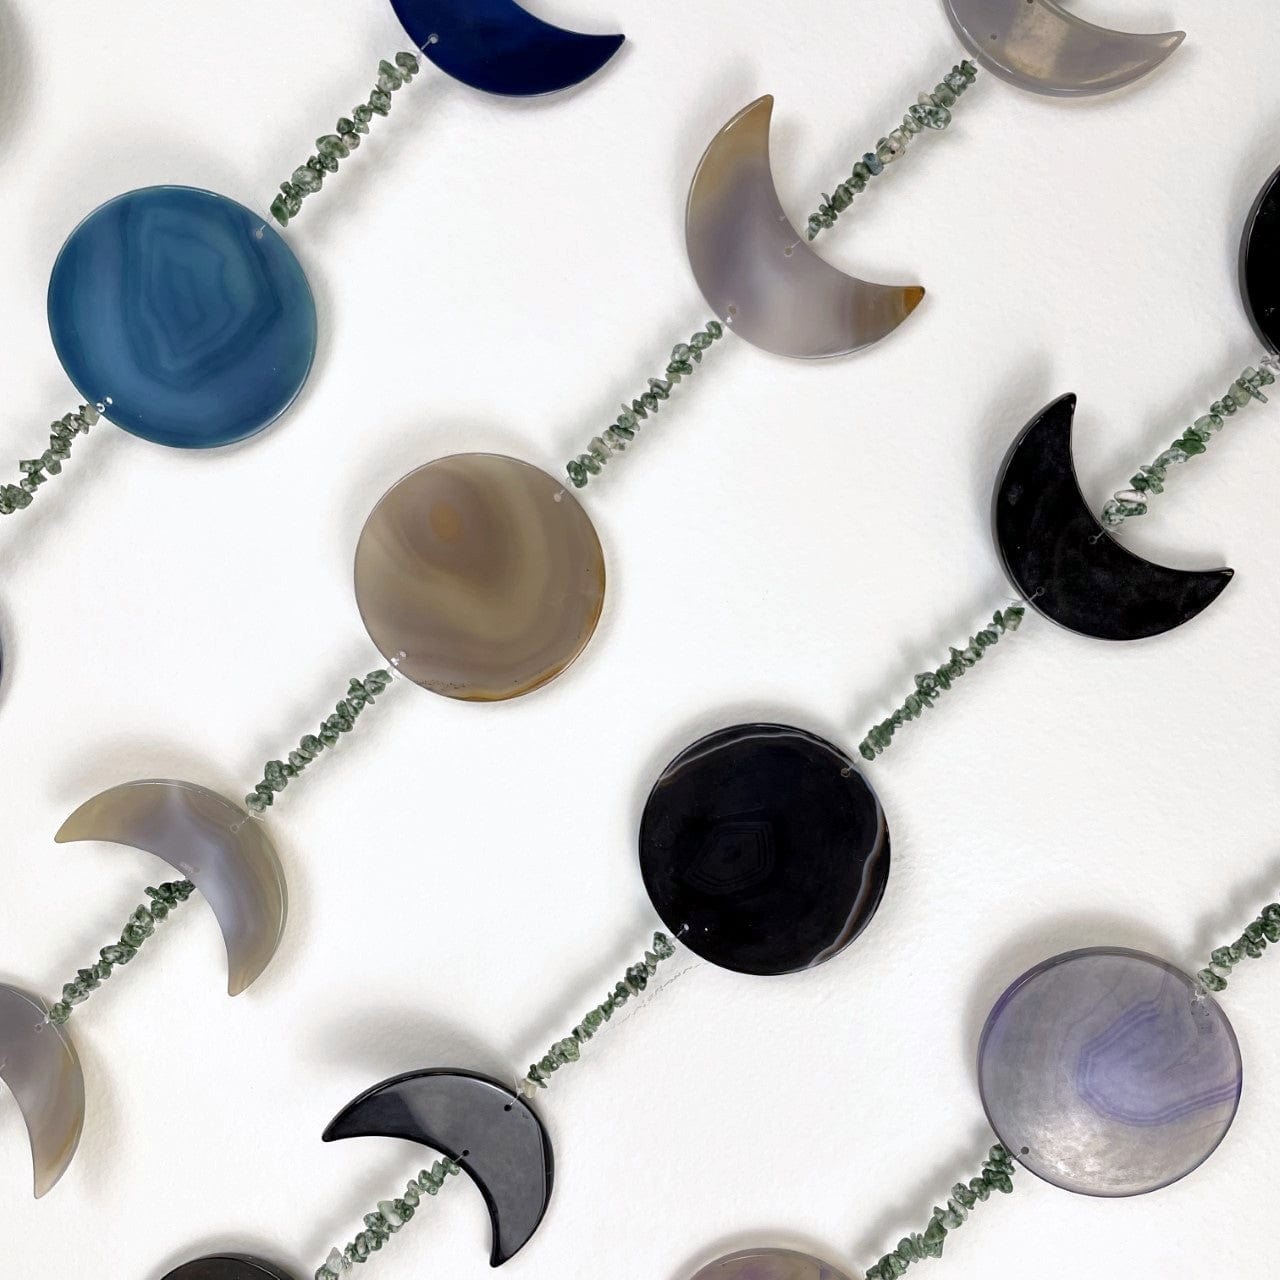 Colored agate moon phase shapes with the moss agate stone beads up close